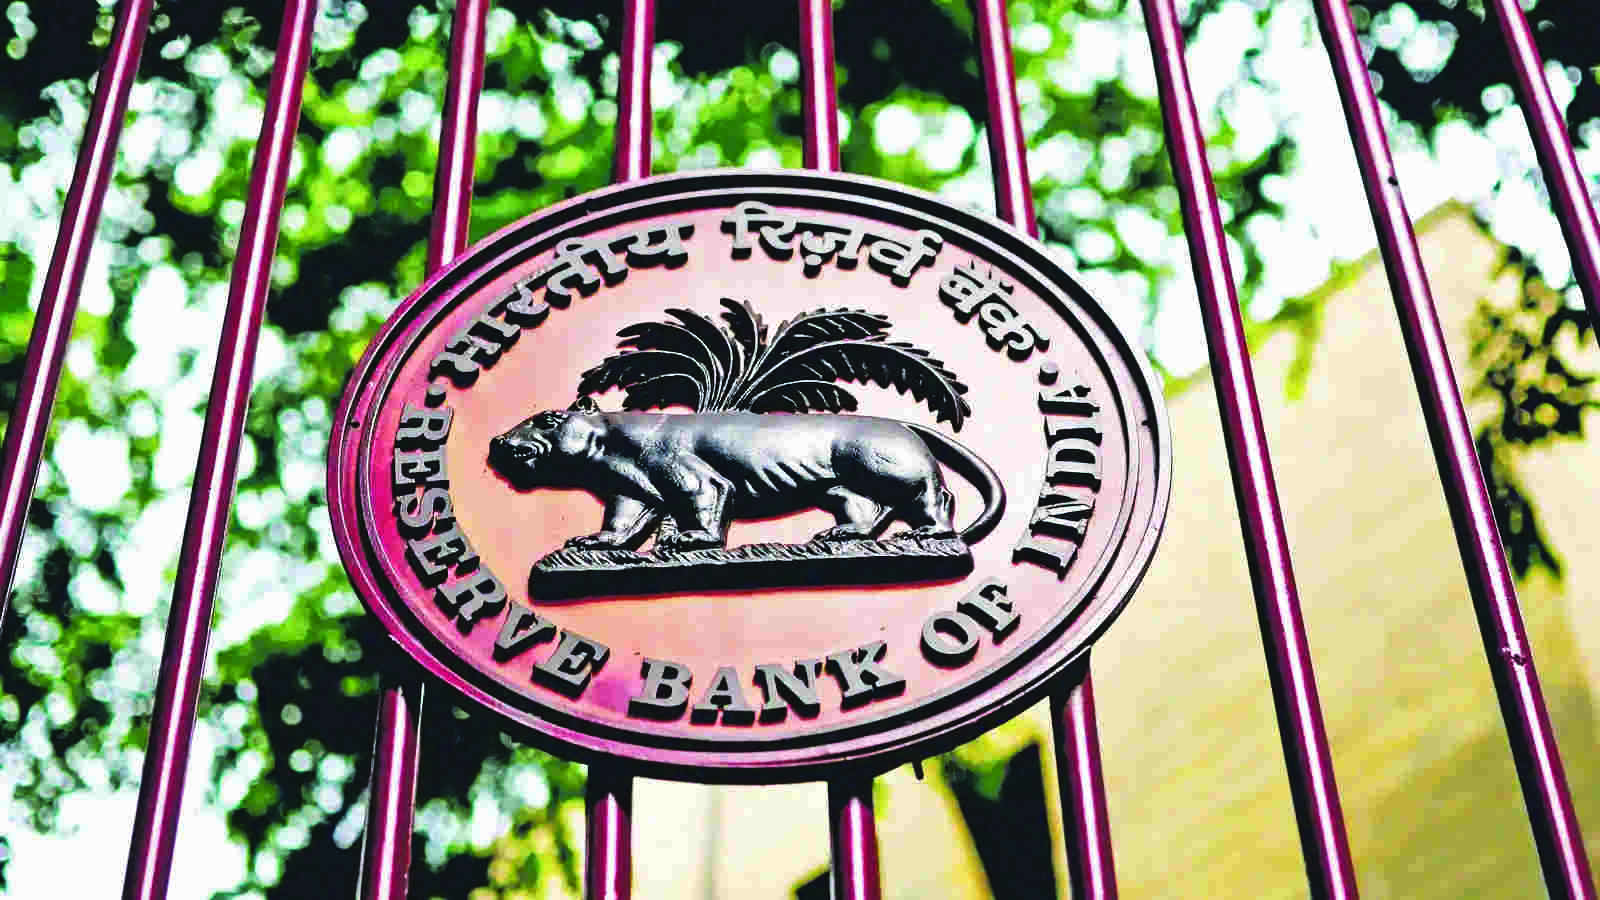 Lagged data, frequent reviews make monetary policys task challenging, says RBI DG Patra